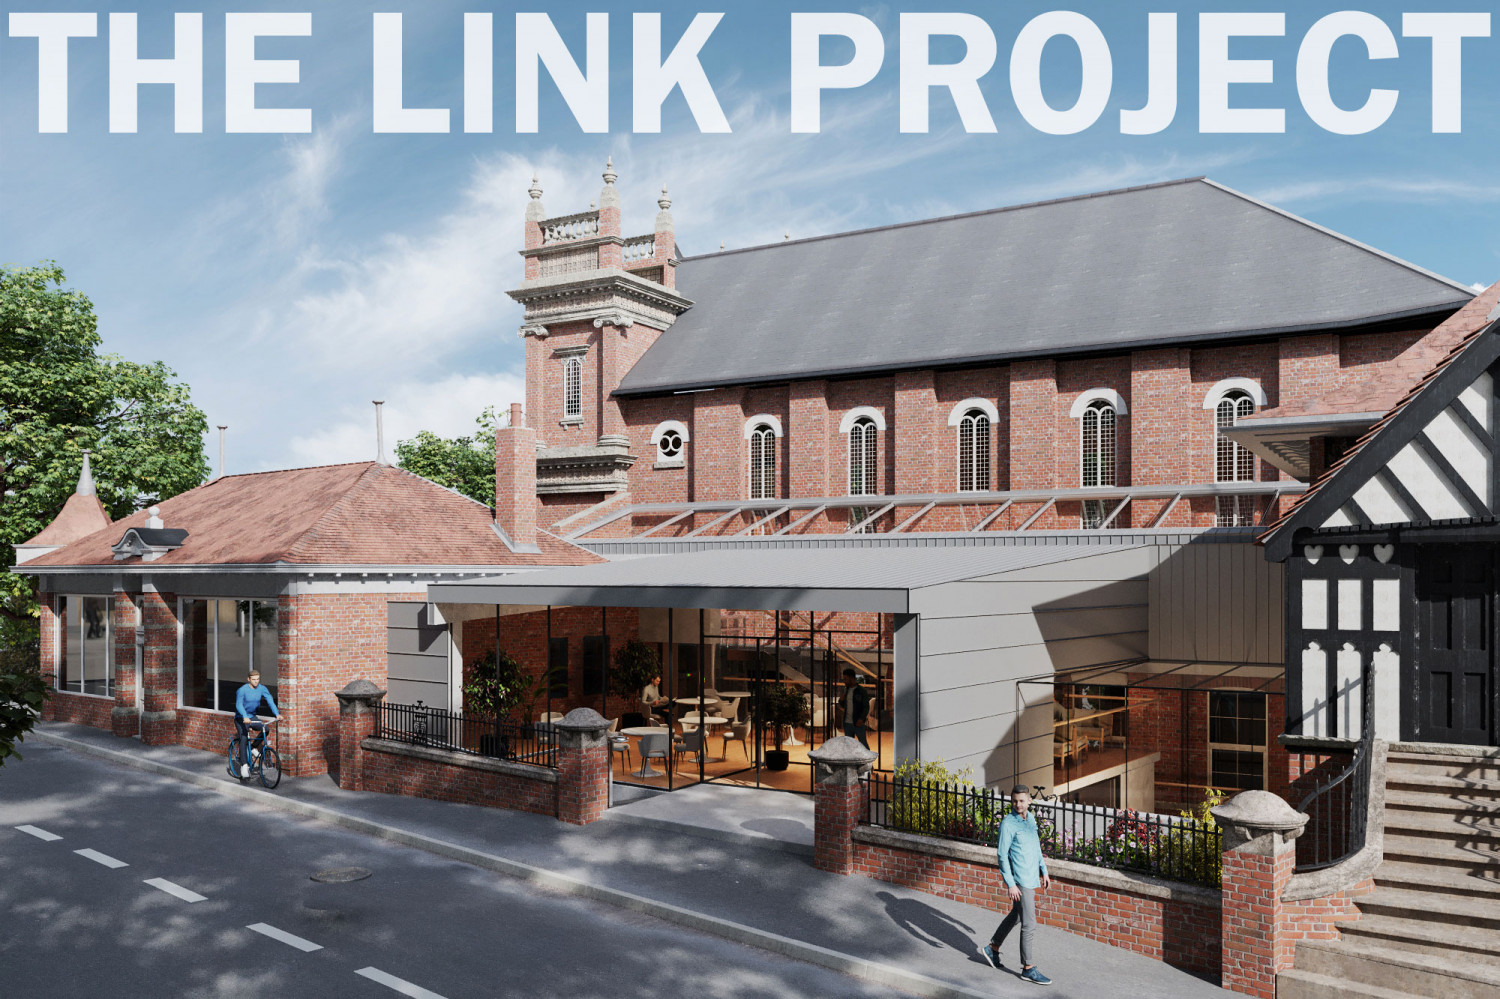 The Link Project at Ashbourne Methodist Church